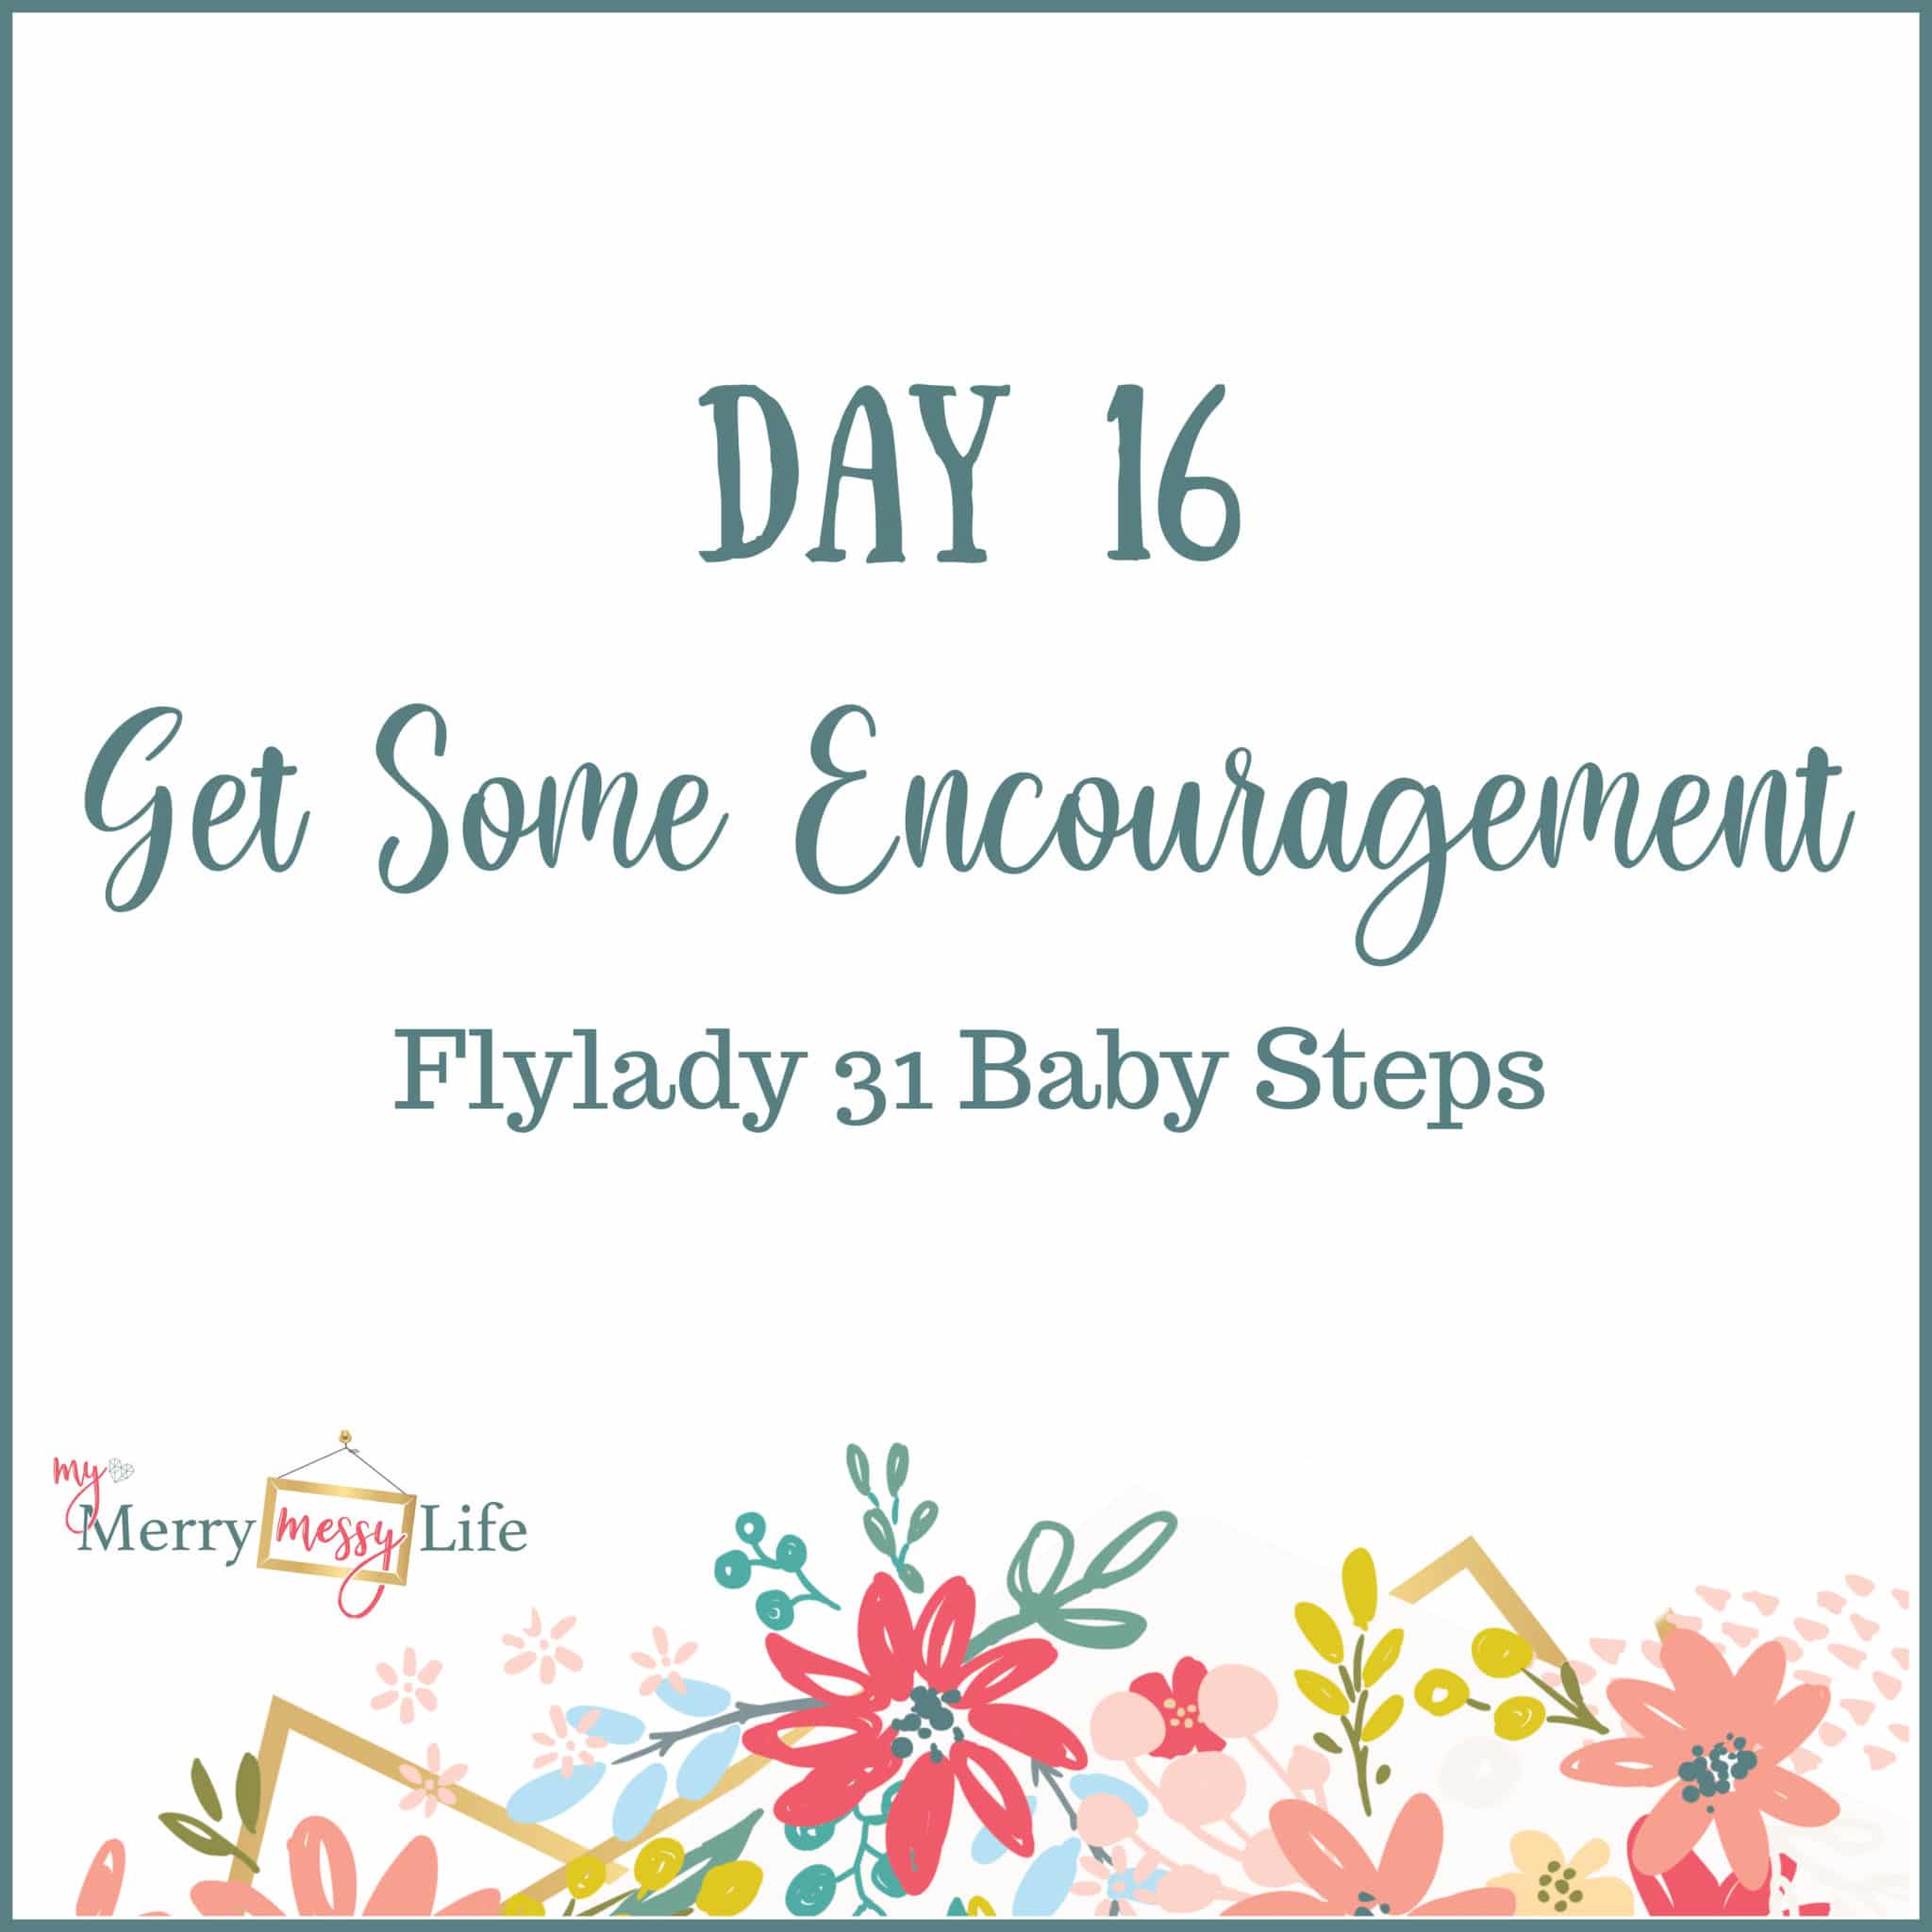 Flylady 31 Baby Steps - Day 16 - Get Some Encouragement